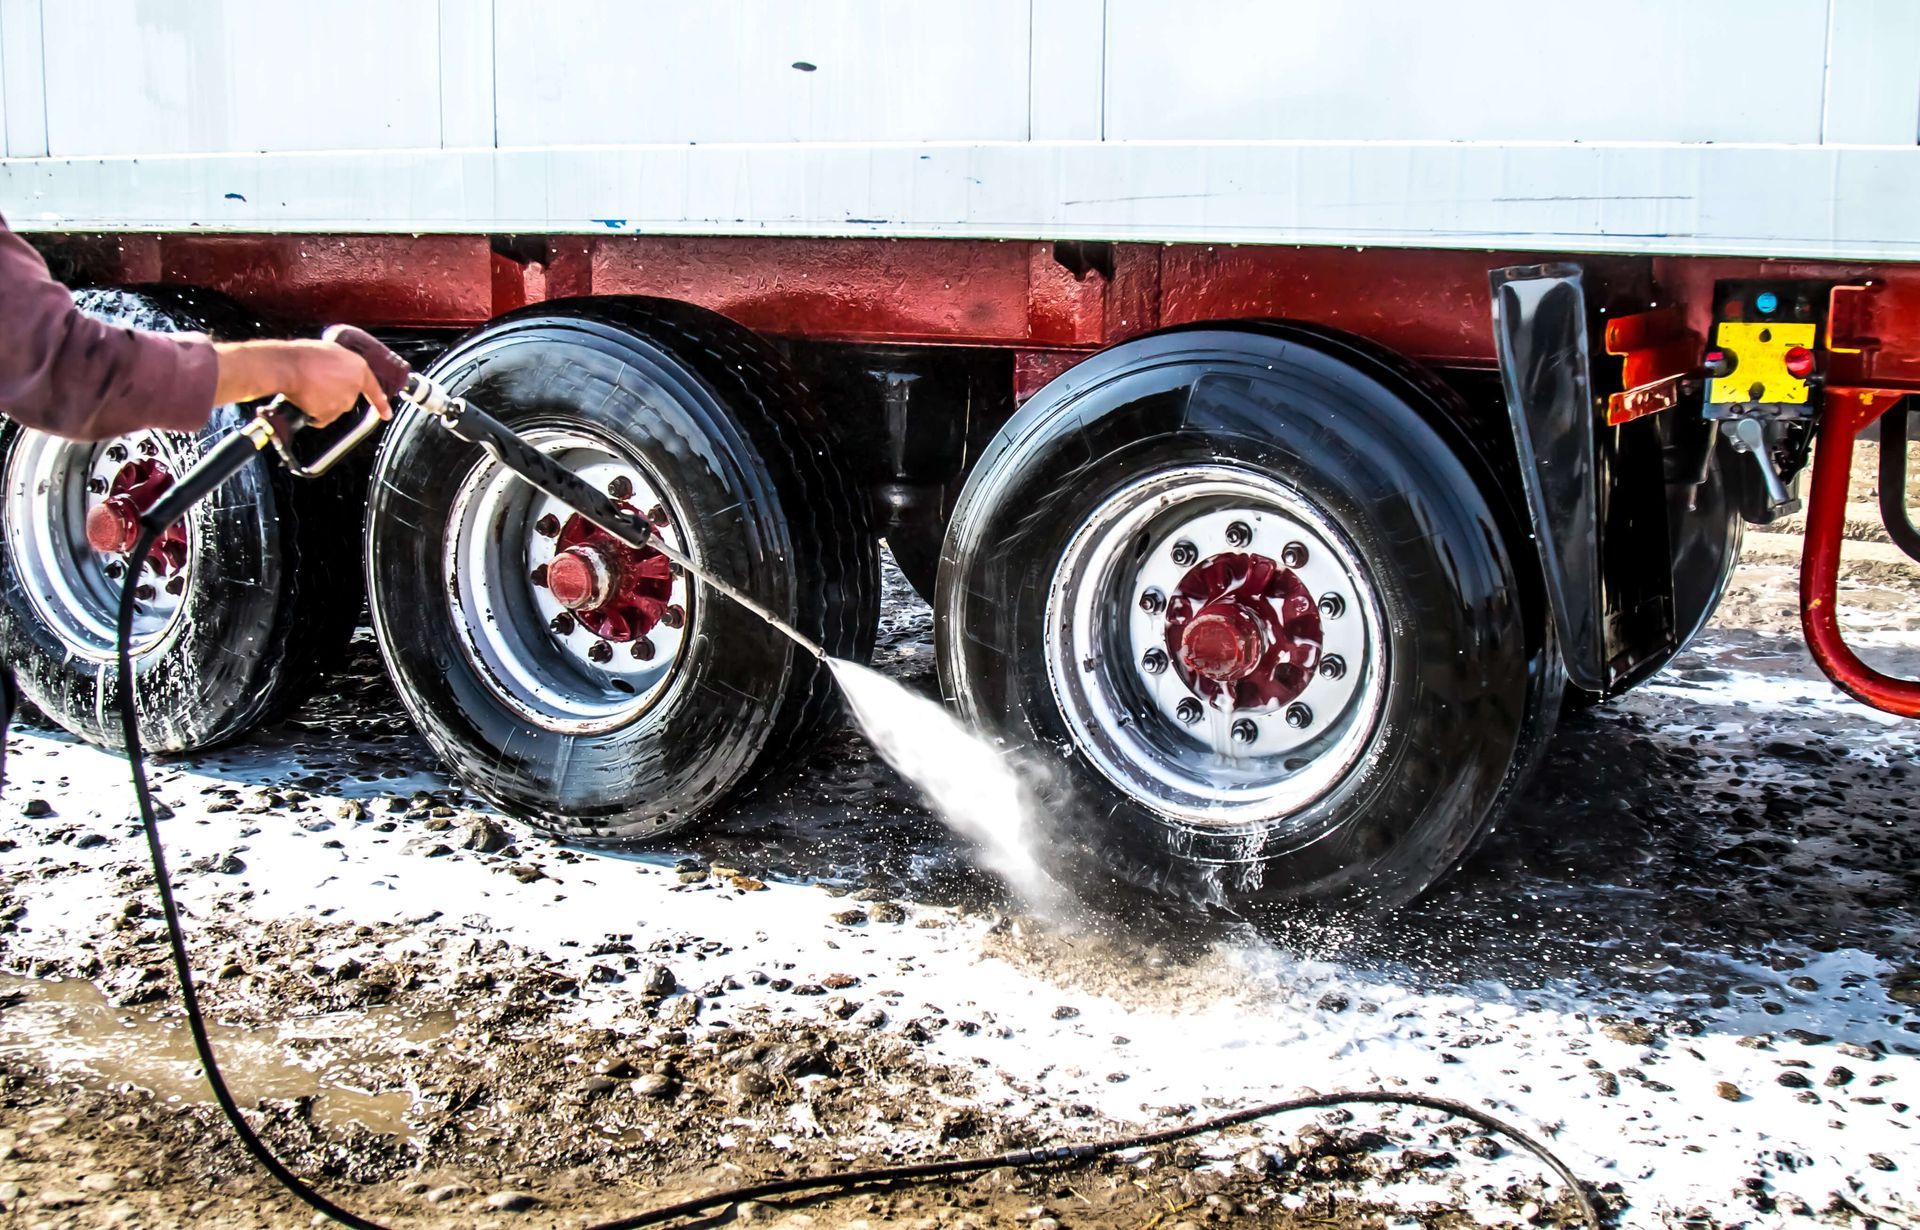 Power washing tires on commercial vehicles